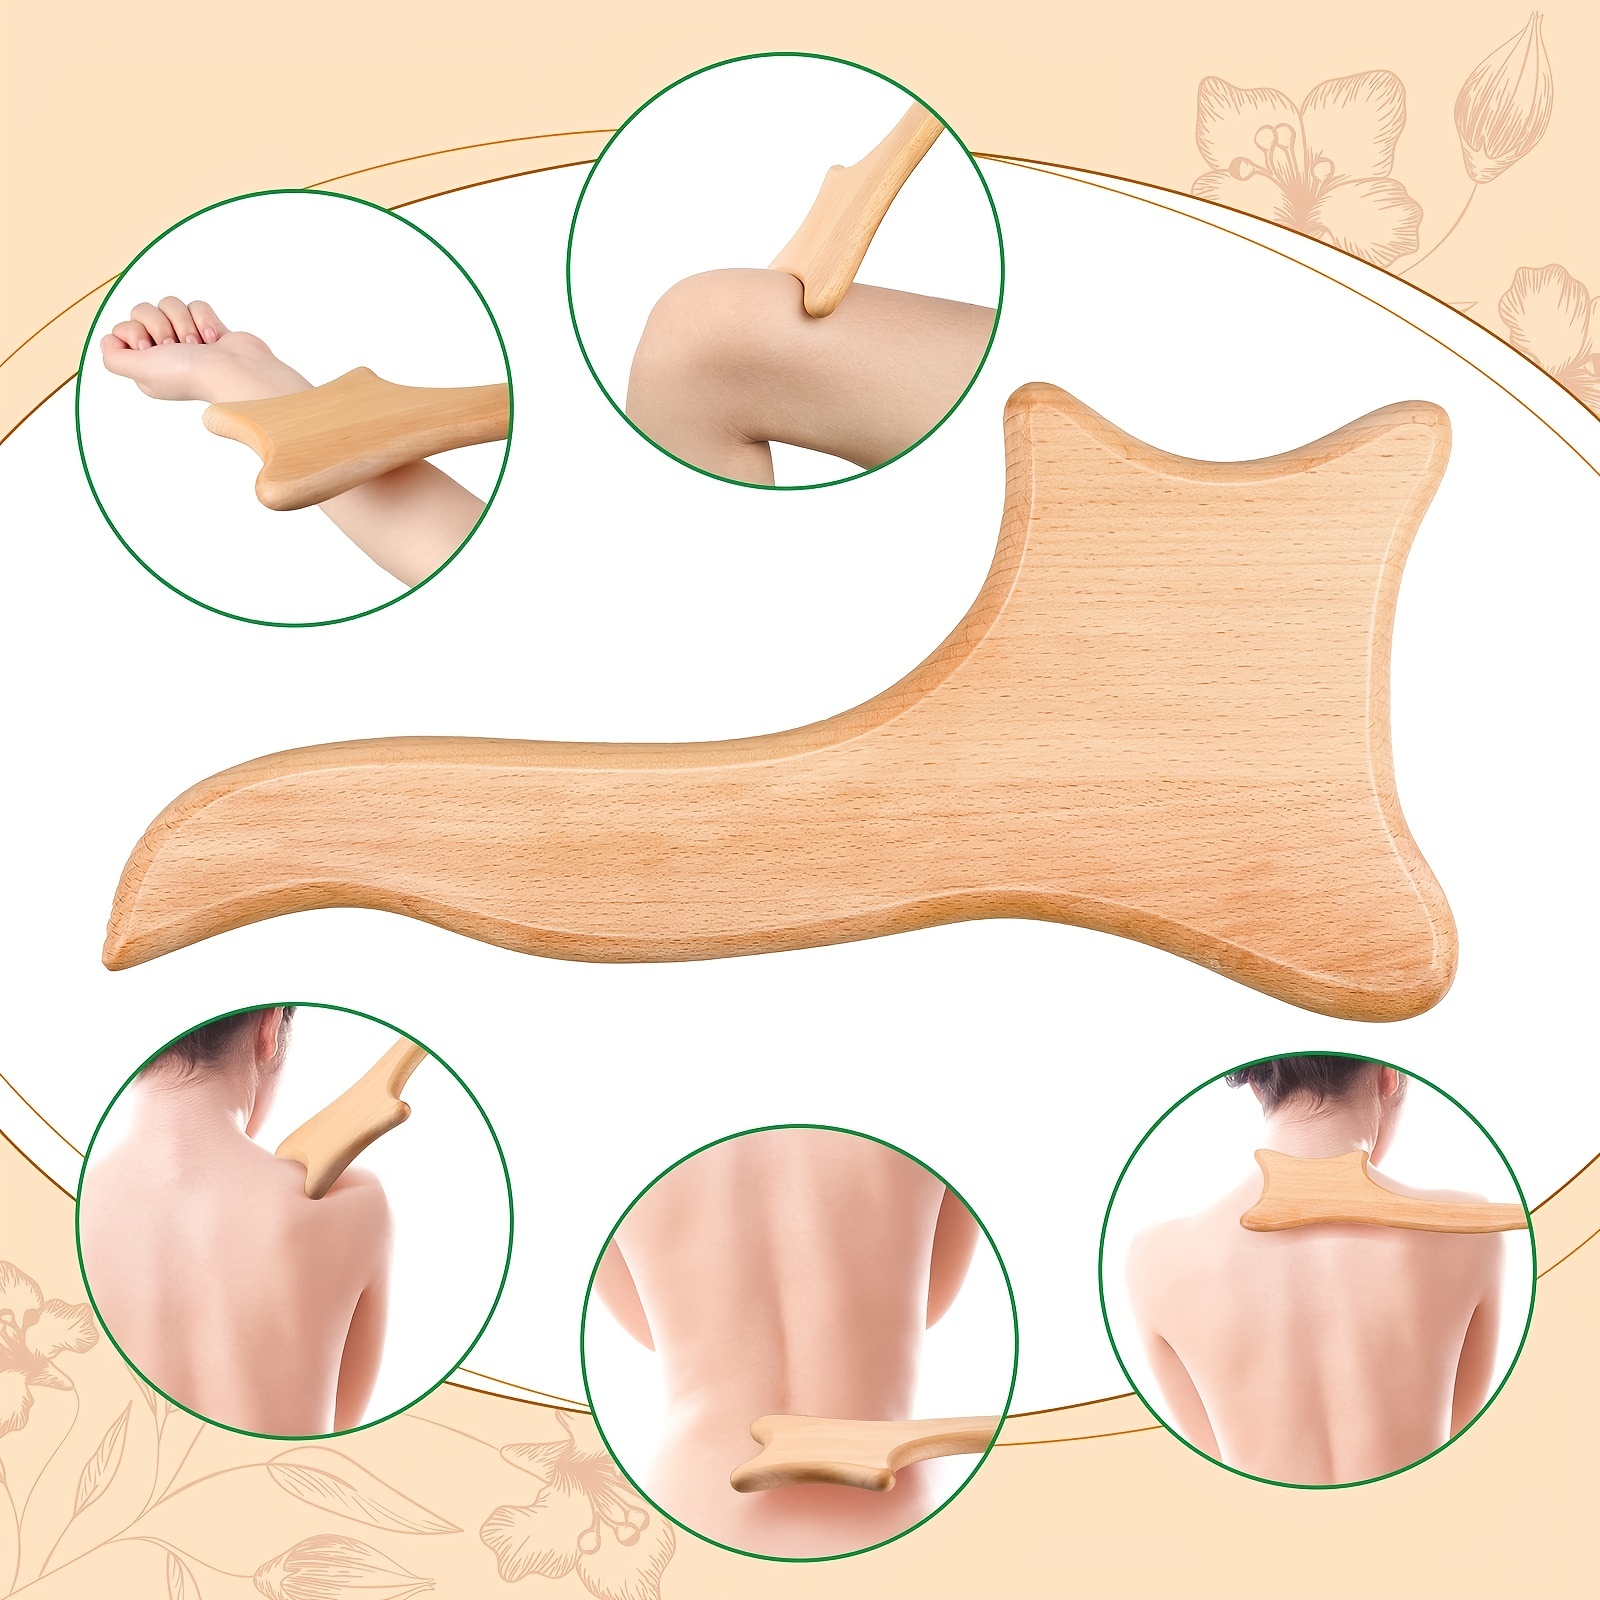 Body Back Wooden Gua Sha Massage Tool - Wood Therapy Lymphatic Drainage  Tool - Gua Sha Cellulite Massager for Body Sculpting and Shaping